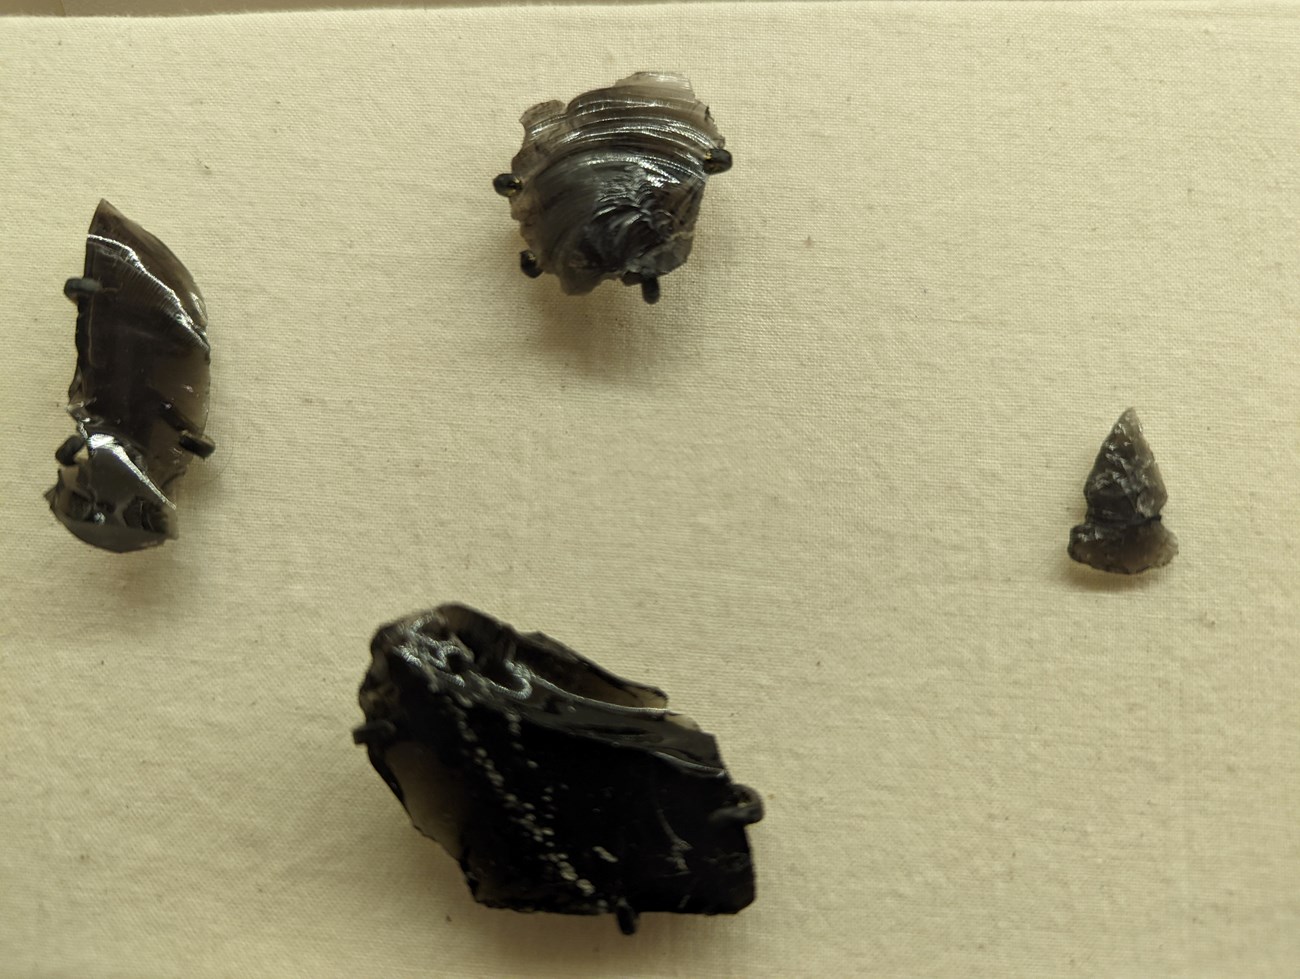 Obsidian fragments and spear point, on display at the Aztec Ruins museum.